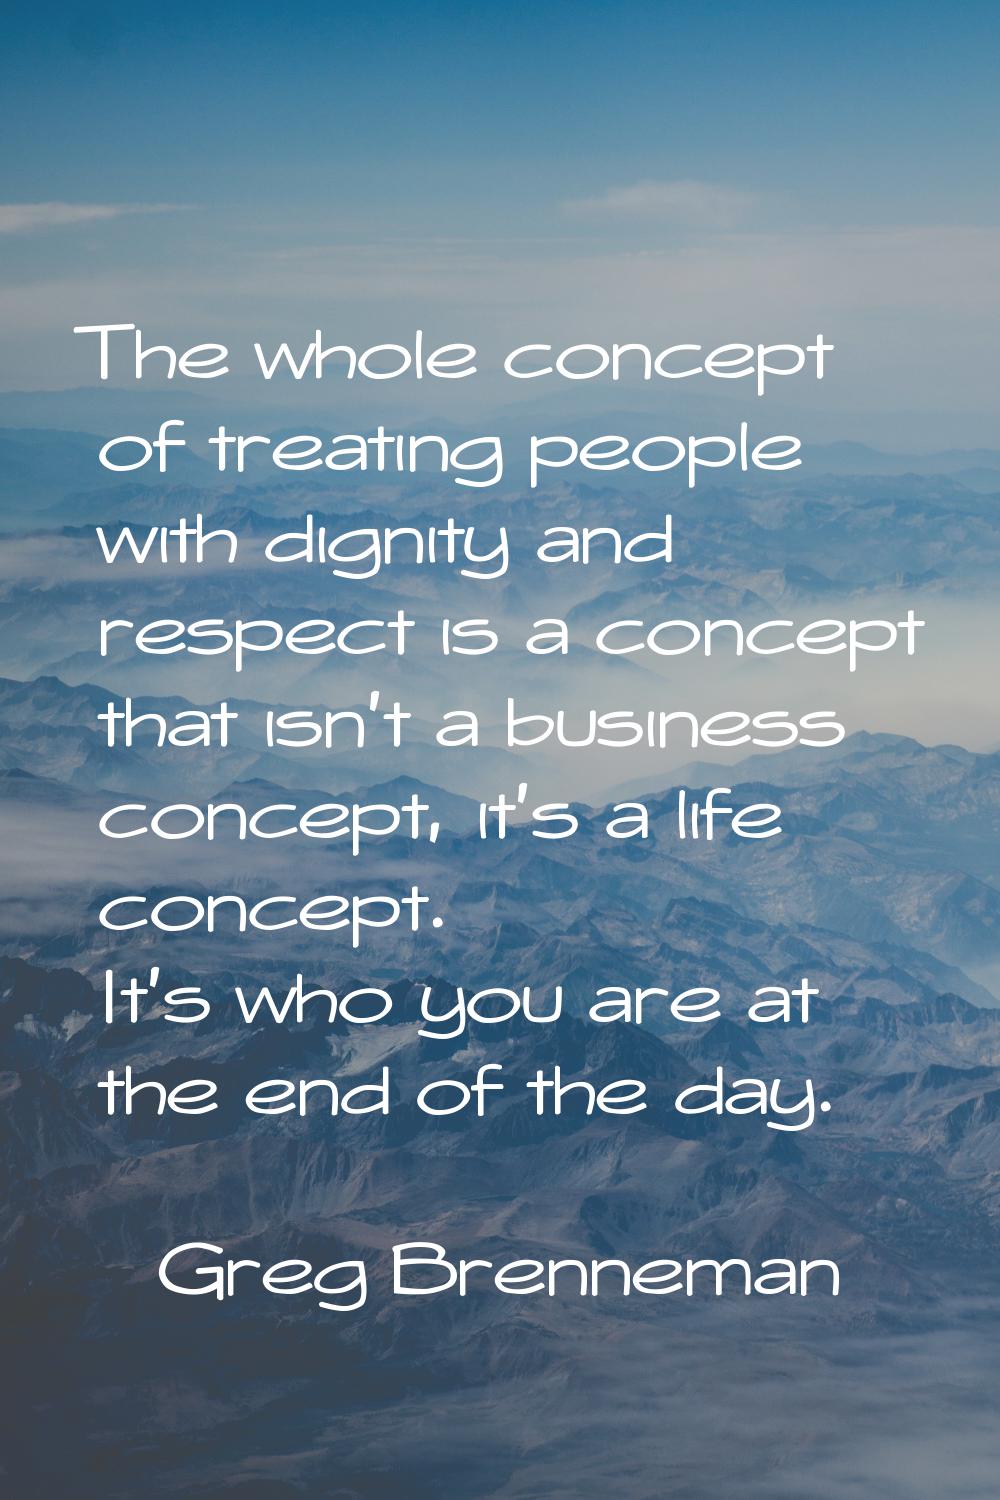 The whole concept of treating people with dignity and respect is a concept that isn't a business co